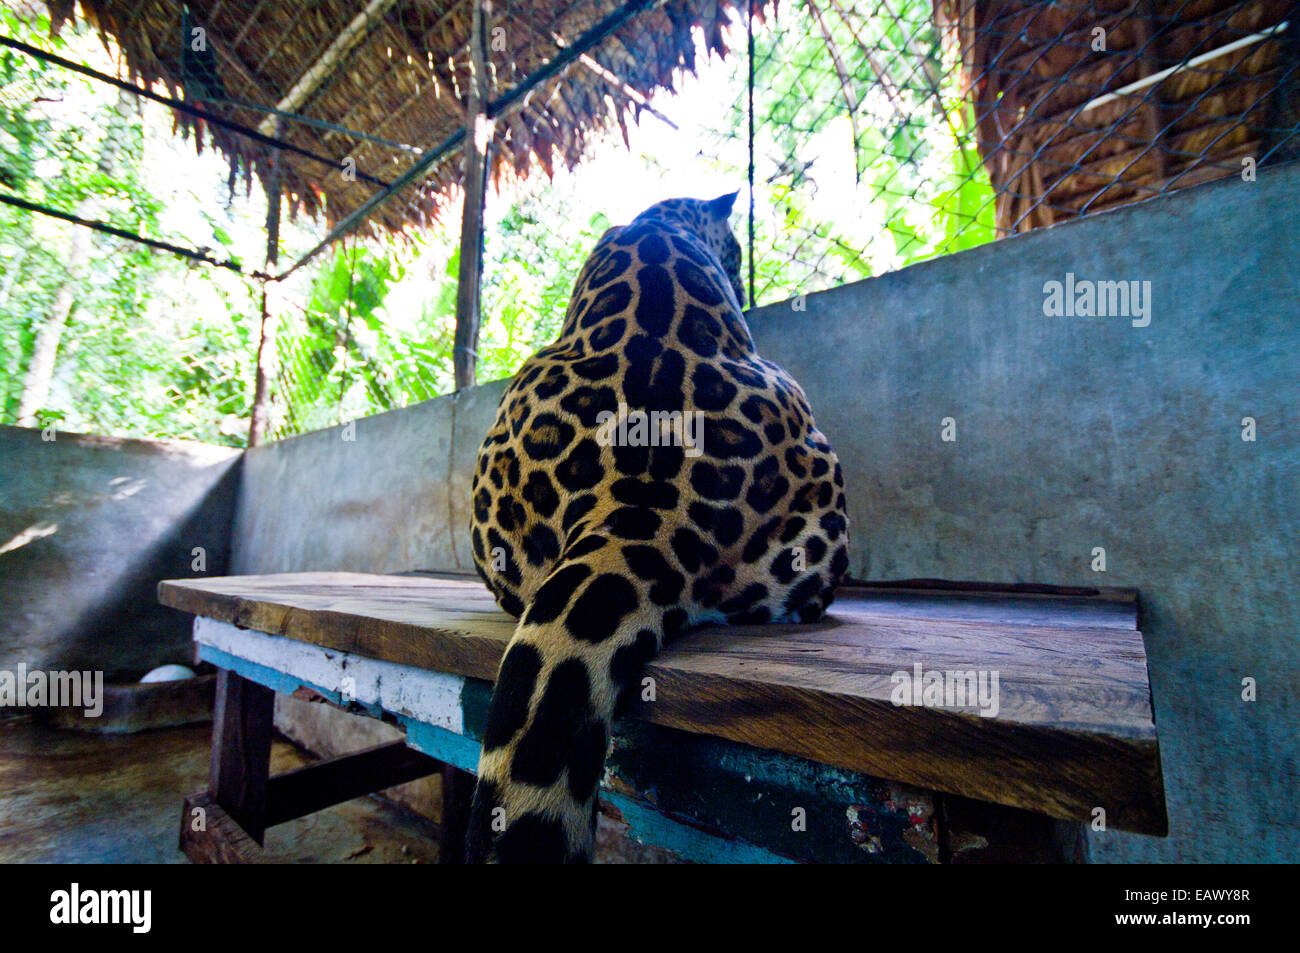 A confiscated Jaguar experiences the sounds and smells of the nearby jungle for the first time. Stock Photo